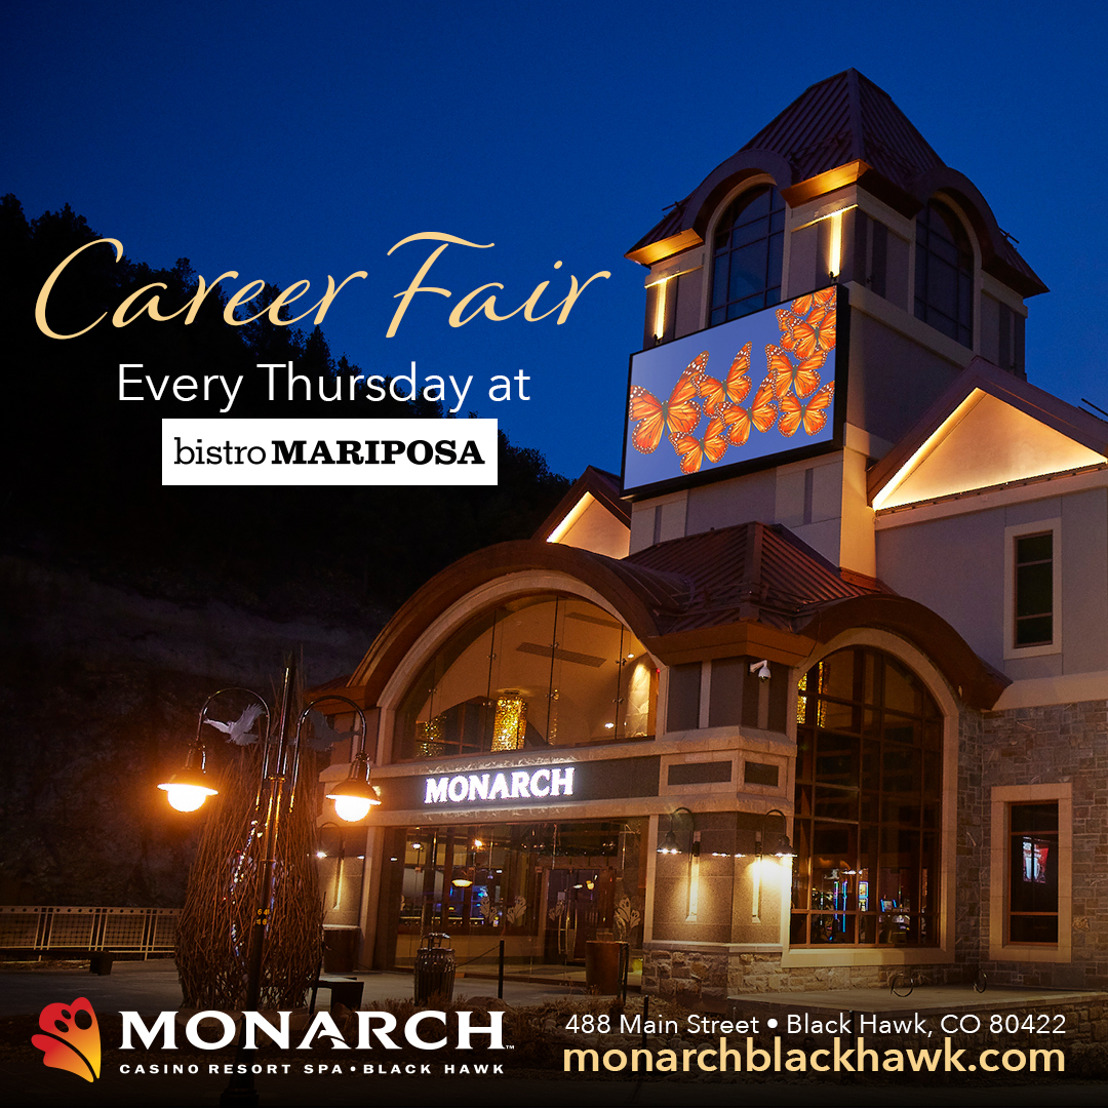 Join the award-winning team at the nationally recognized Monarch Casino Resort Spa!